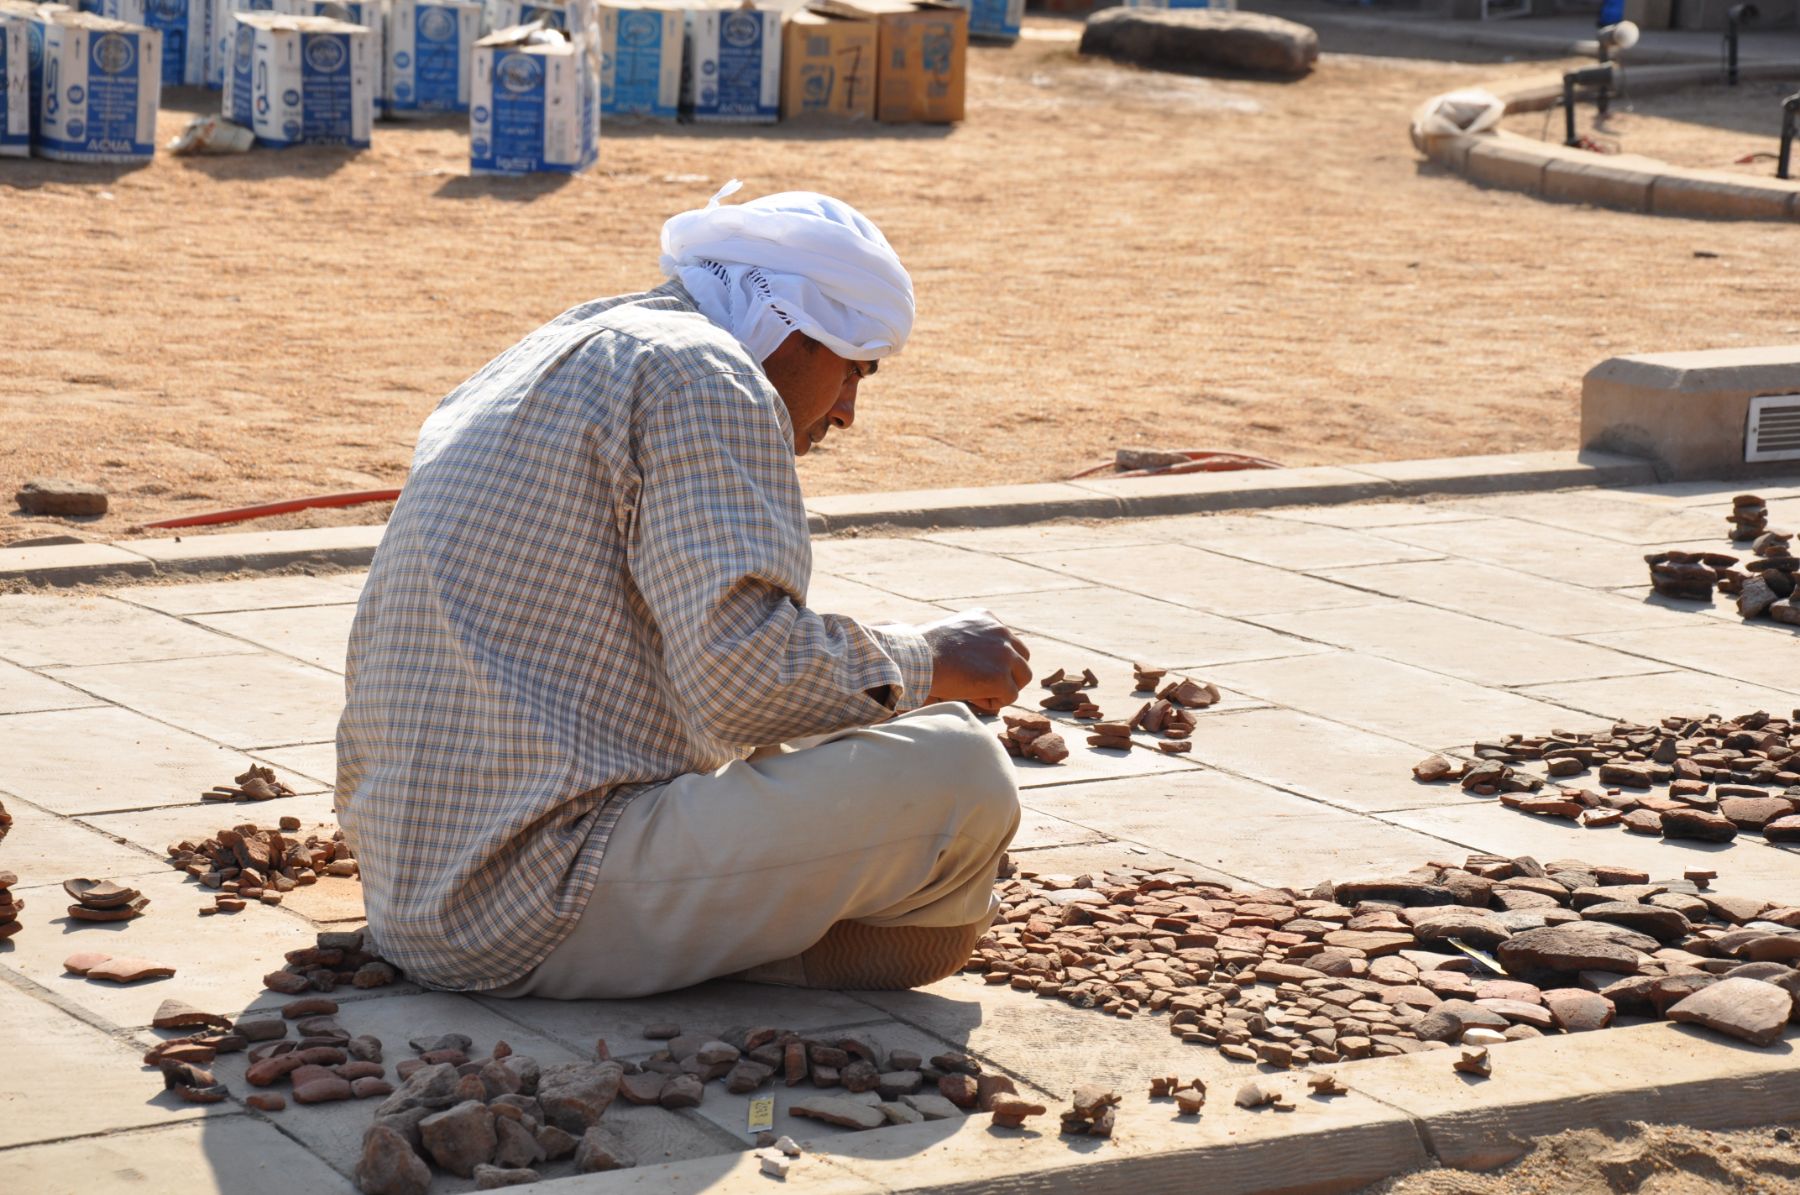 Local worker repairing stonework at an ancient temple site in Egypt